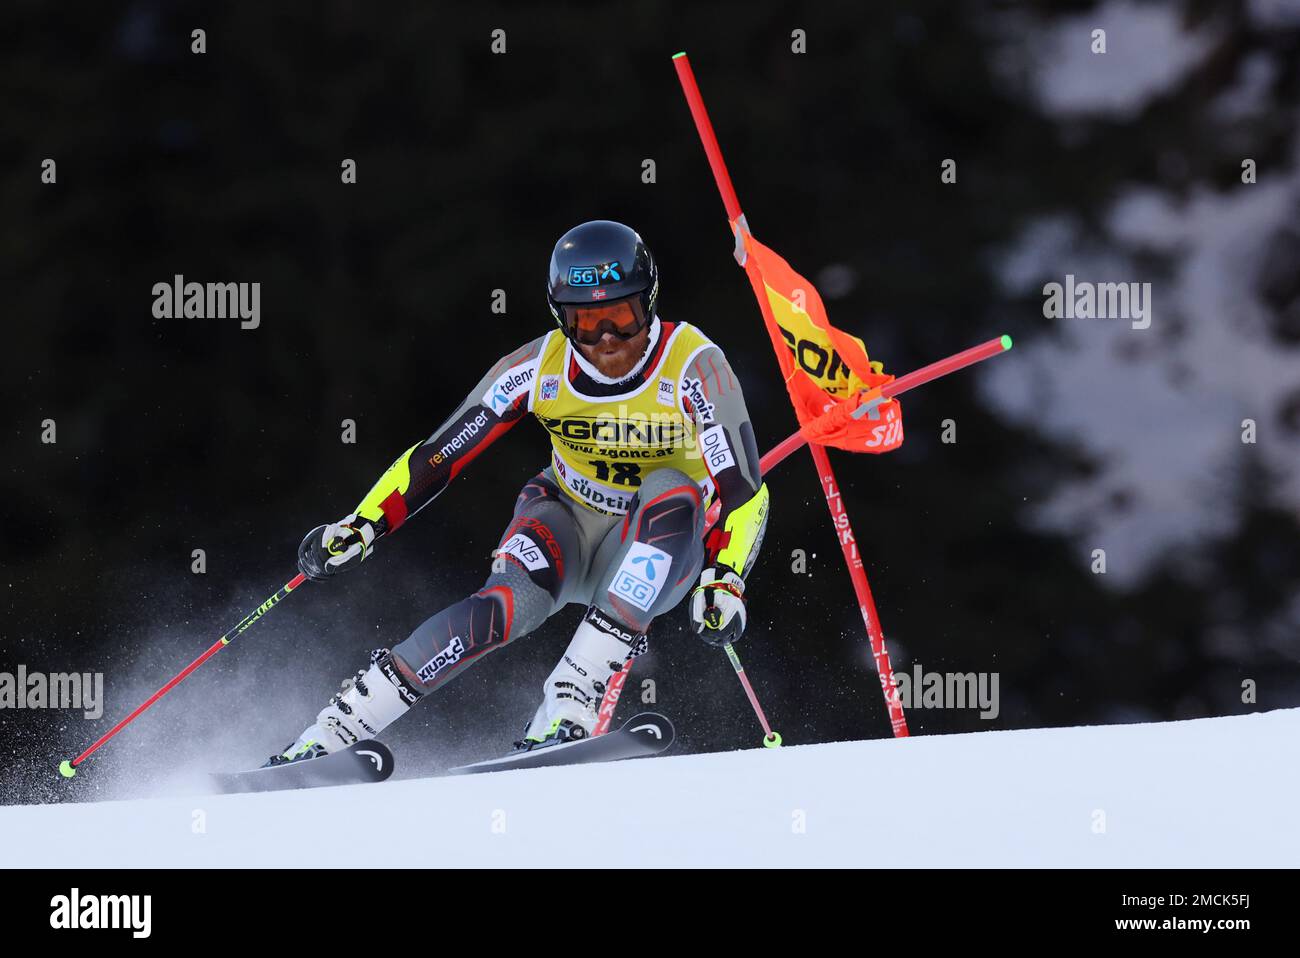 Norways Leif Kristian Nestvold Haugen competes during an alpine ski, mens World Cup giant slalom race in Alta Badia, Italy, Monday, Dec